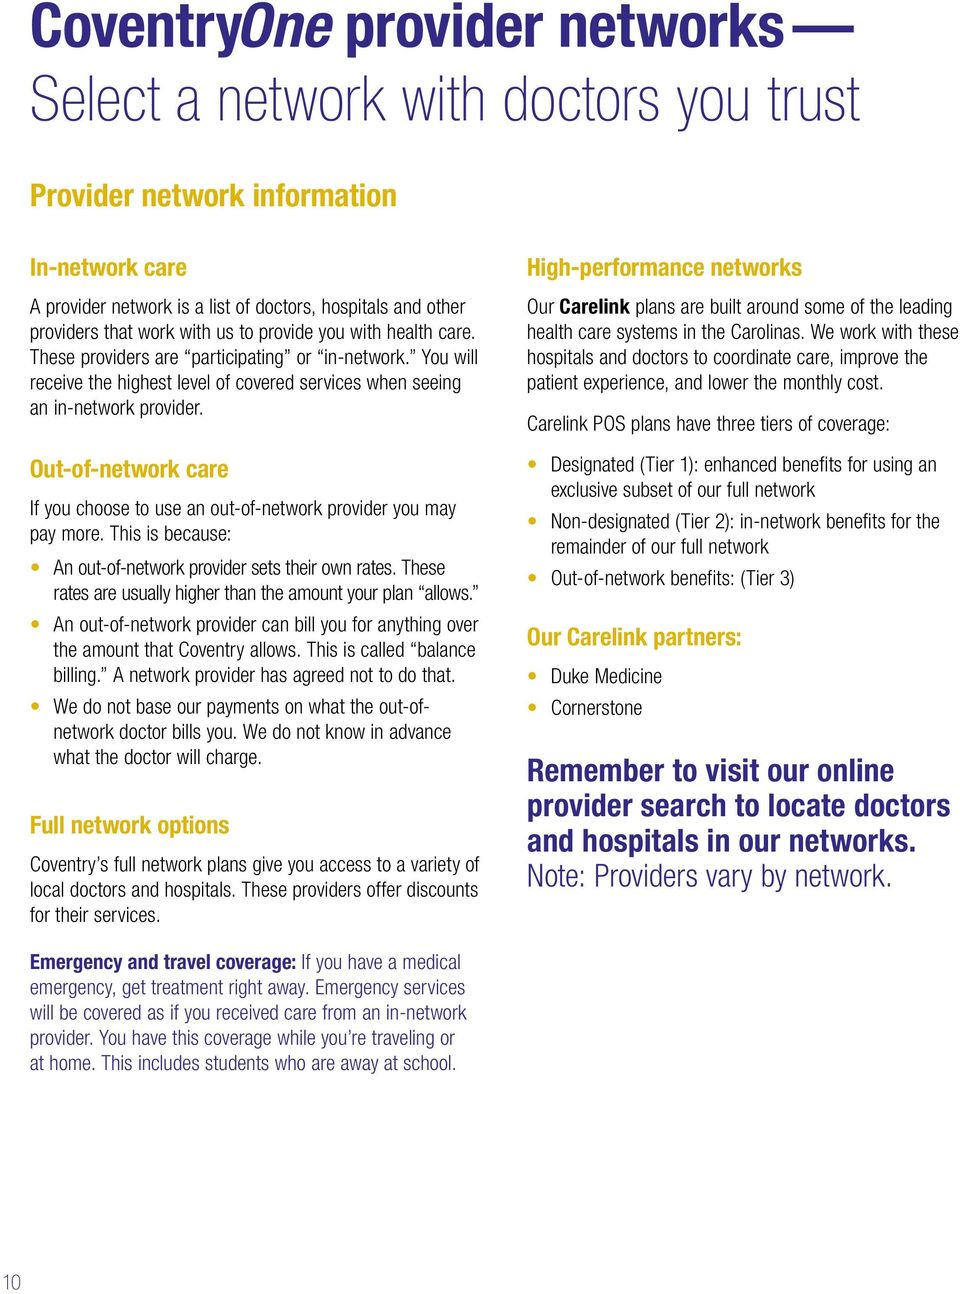 Out-of-network care If you choose to use an out-of-network provider you may pay more. This is because: An out-of-network provider sets their own rates.